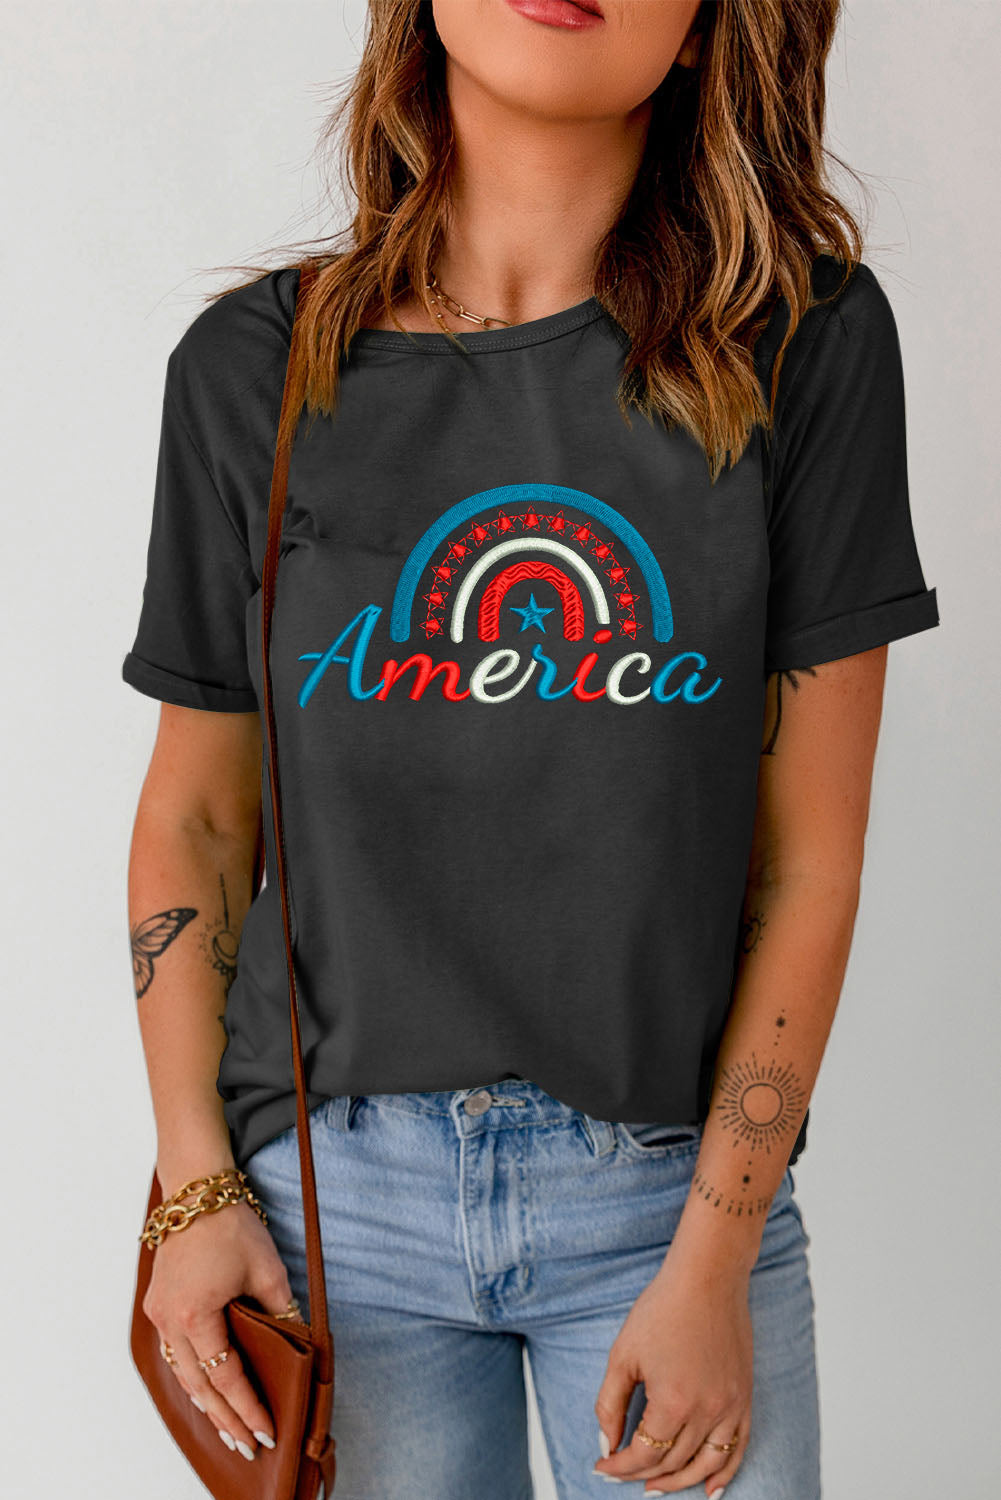 AMERICAN Embroidered Round Neck Cuffed Tee Shirt